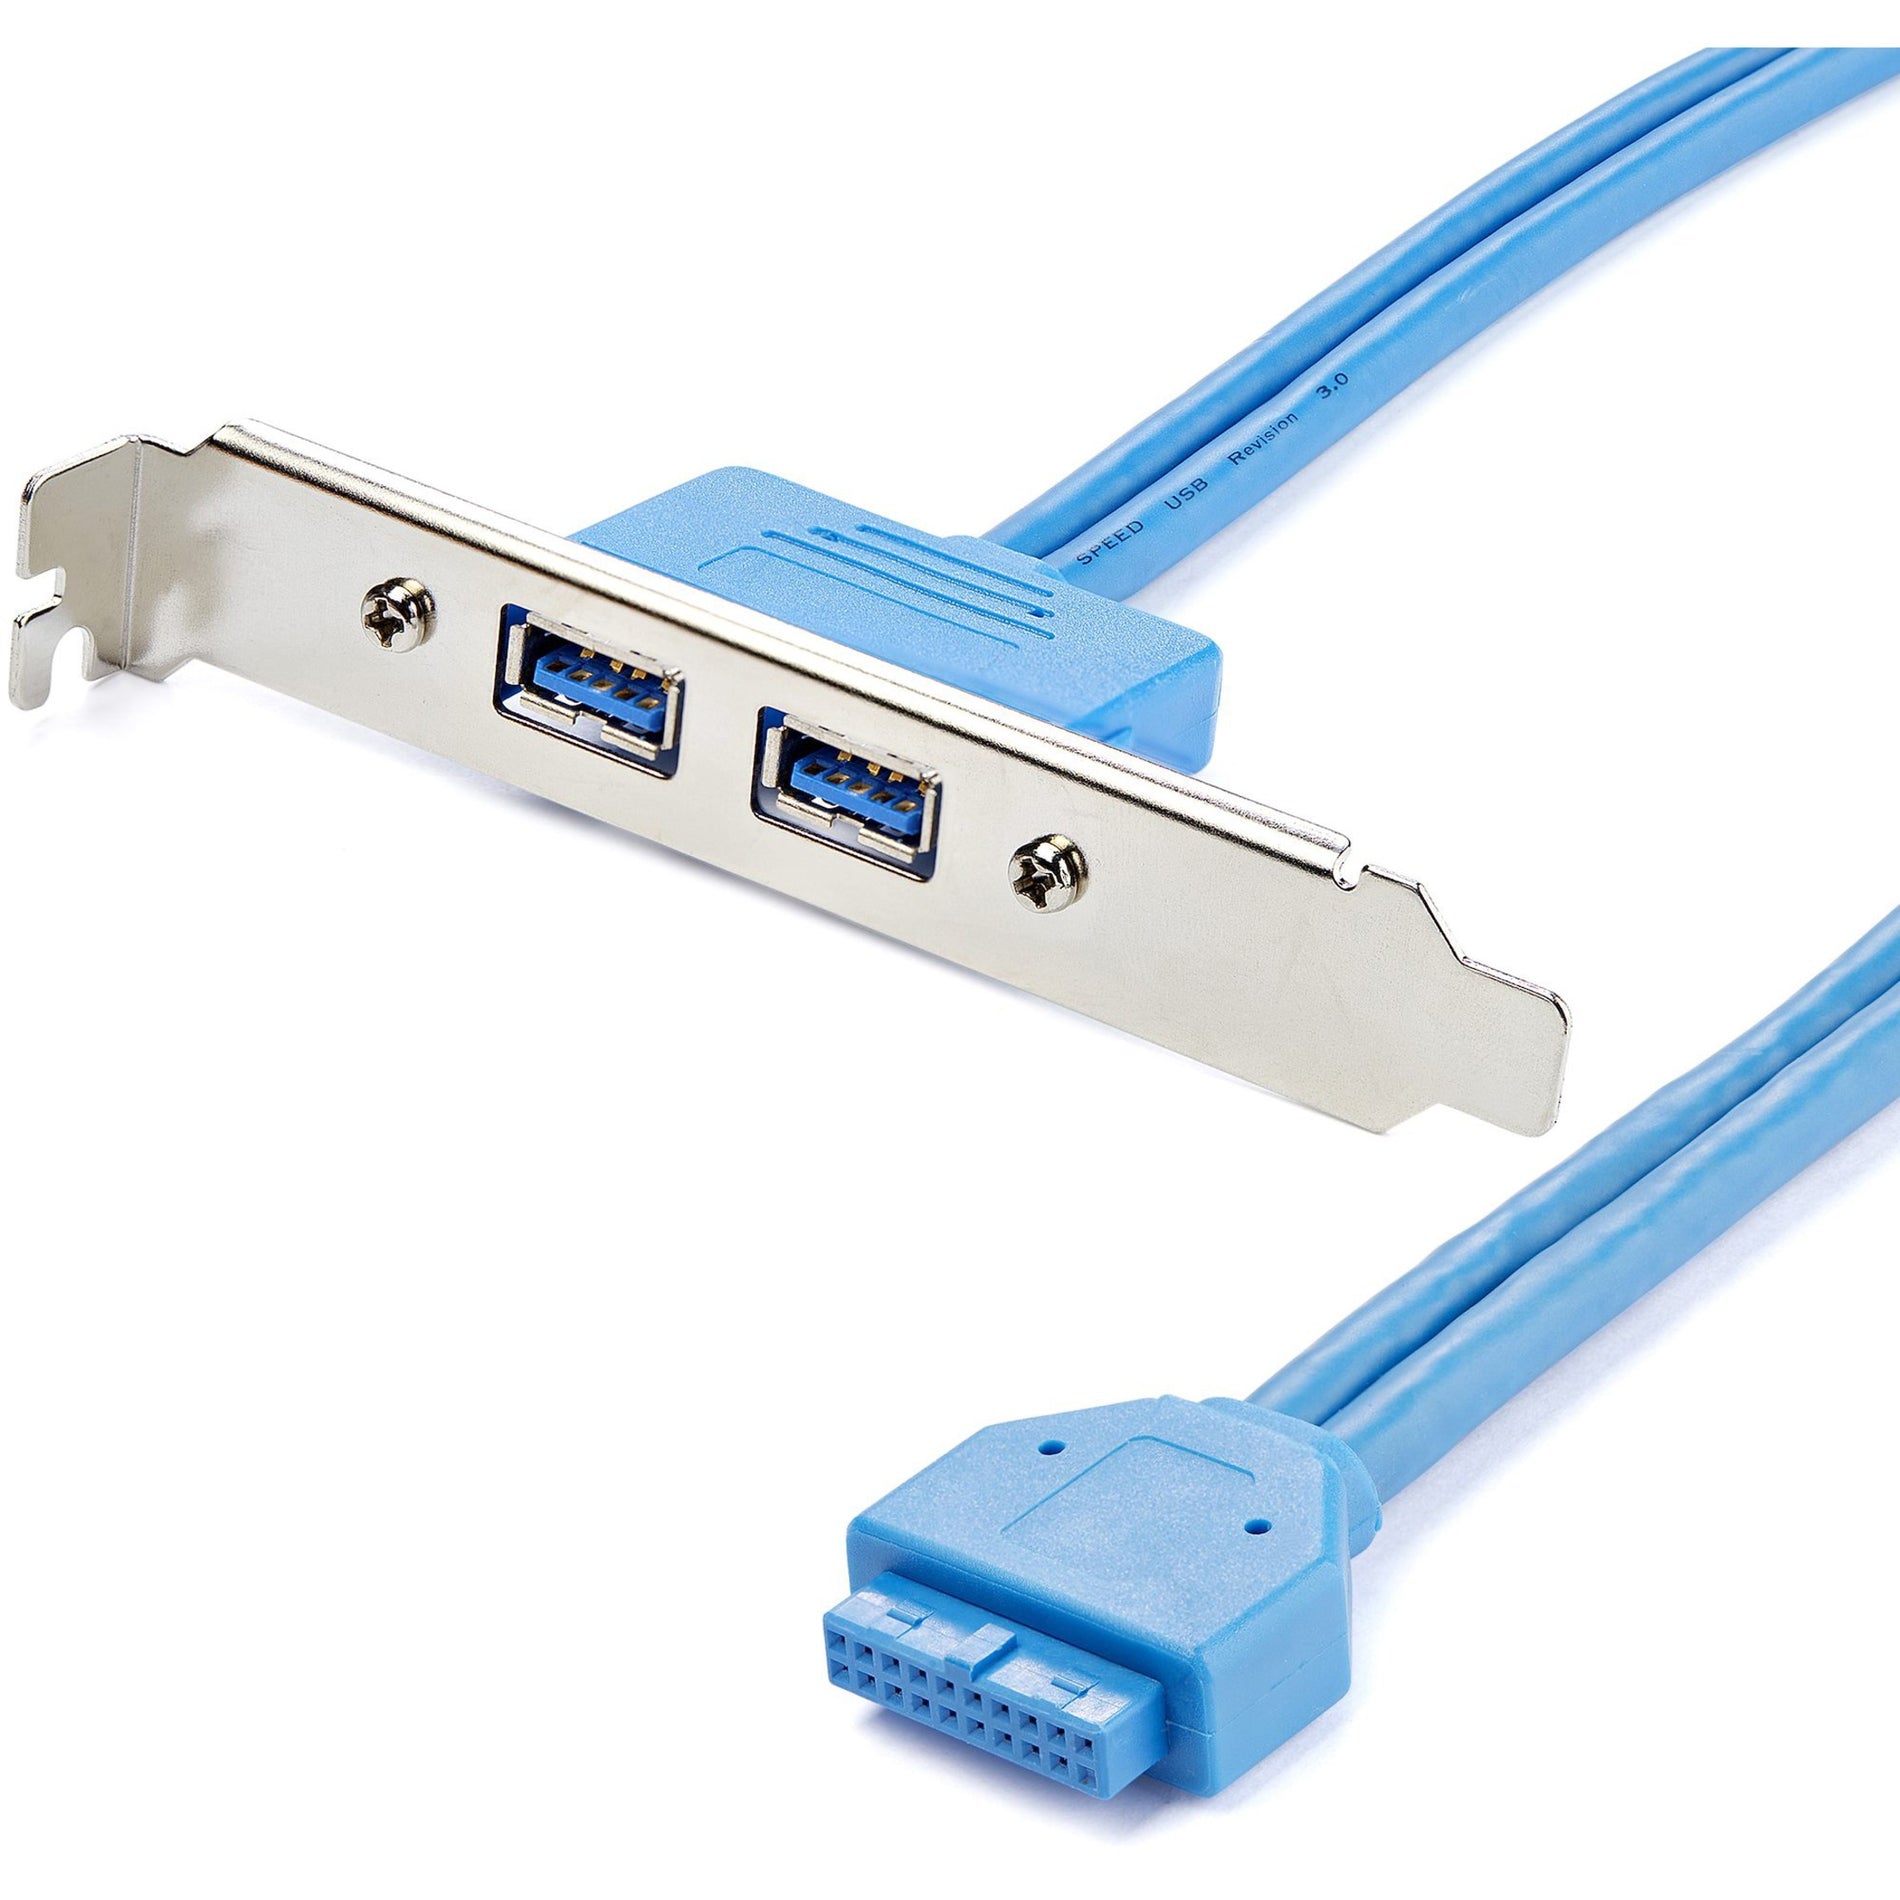 StarTech.com USB3SPLATE 2 Port USB 3.0 A Female Slot Plate Adapter, Easy Data Transfer and Expansion